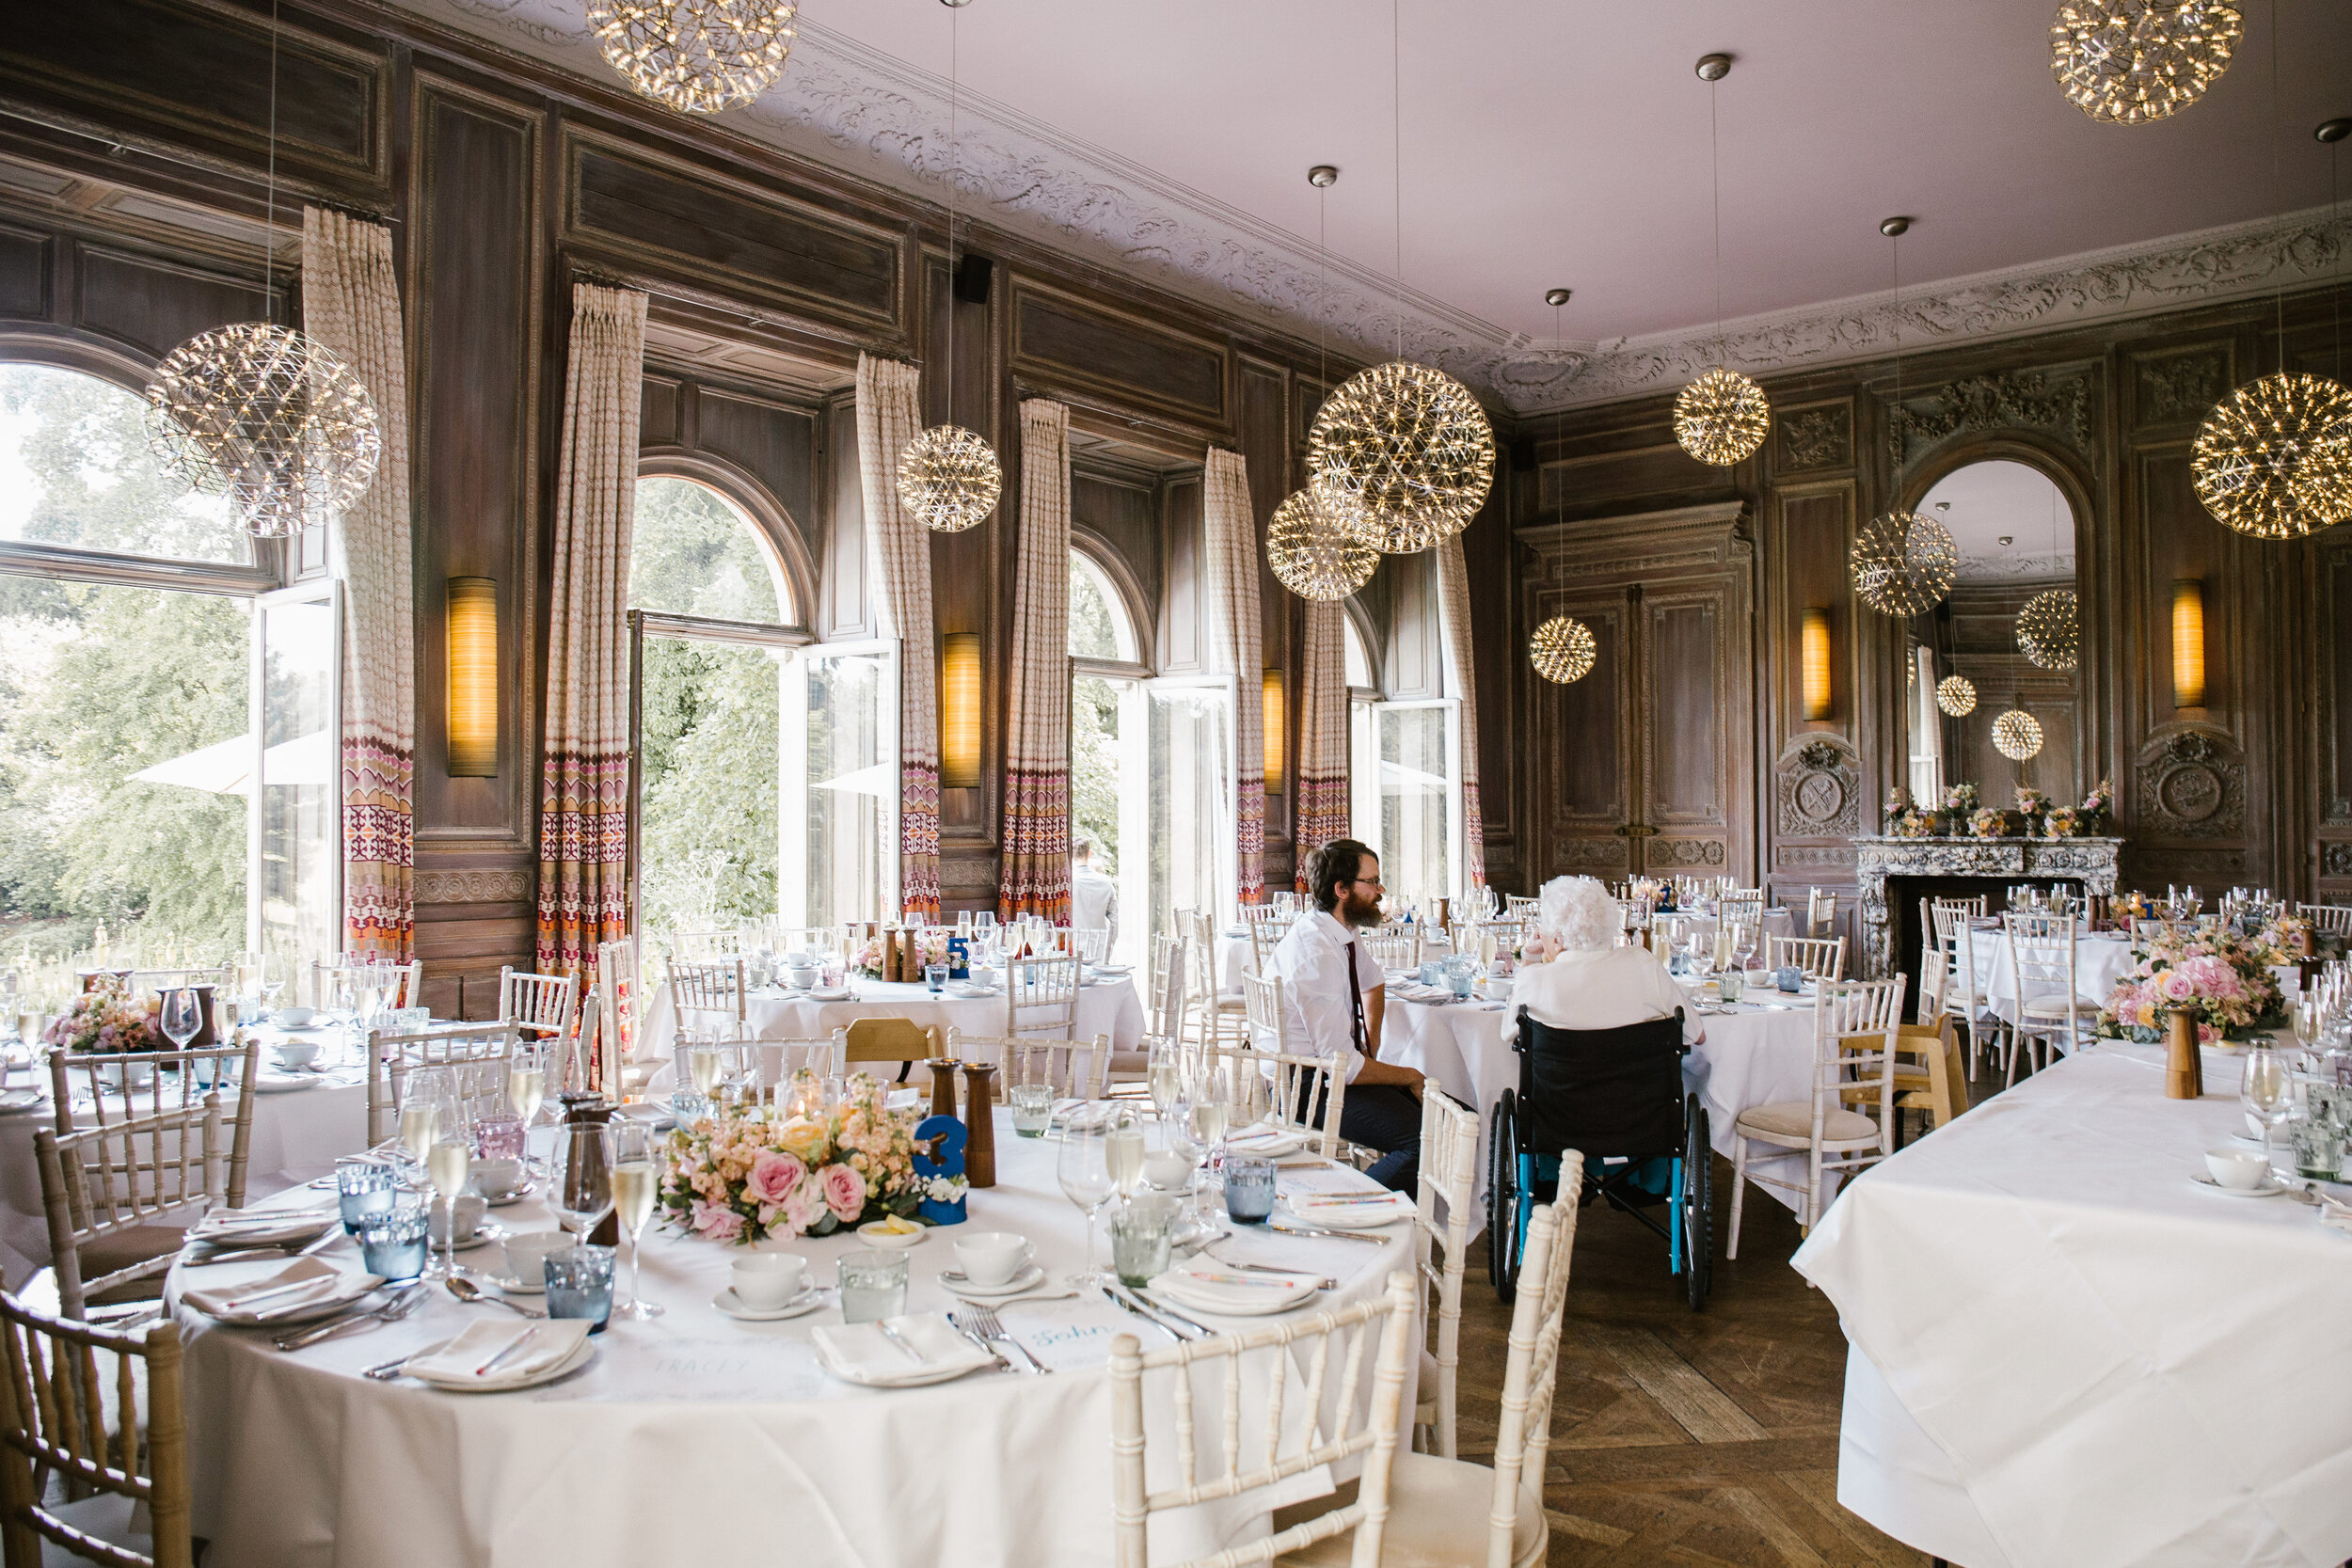 the stunning recpetion room at cowley manor ready for the wedding breakfast